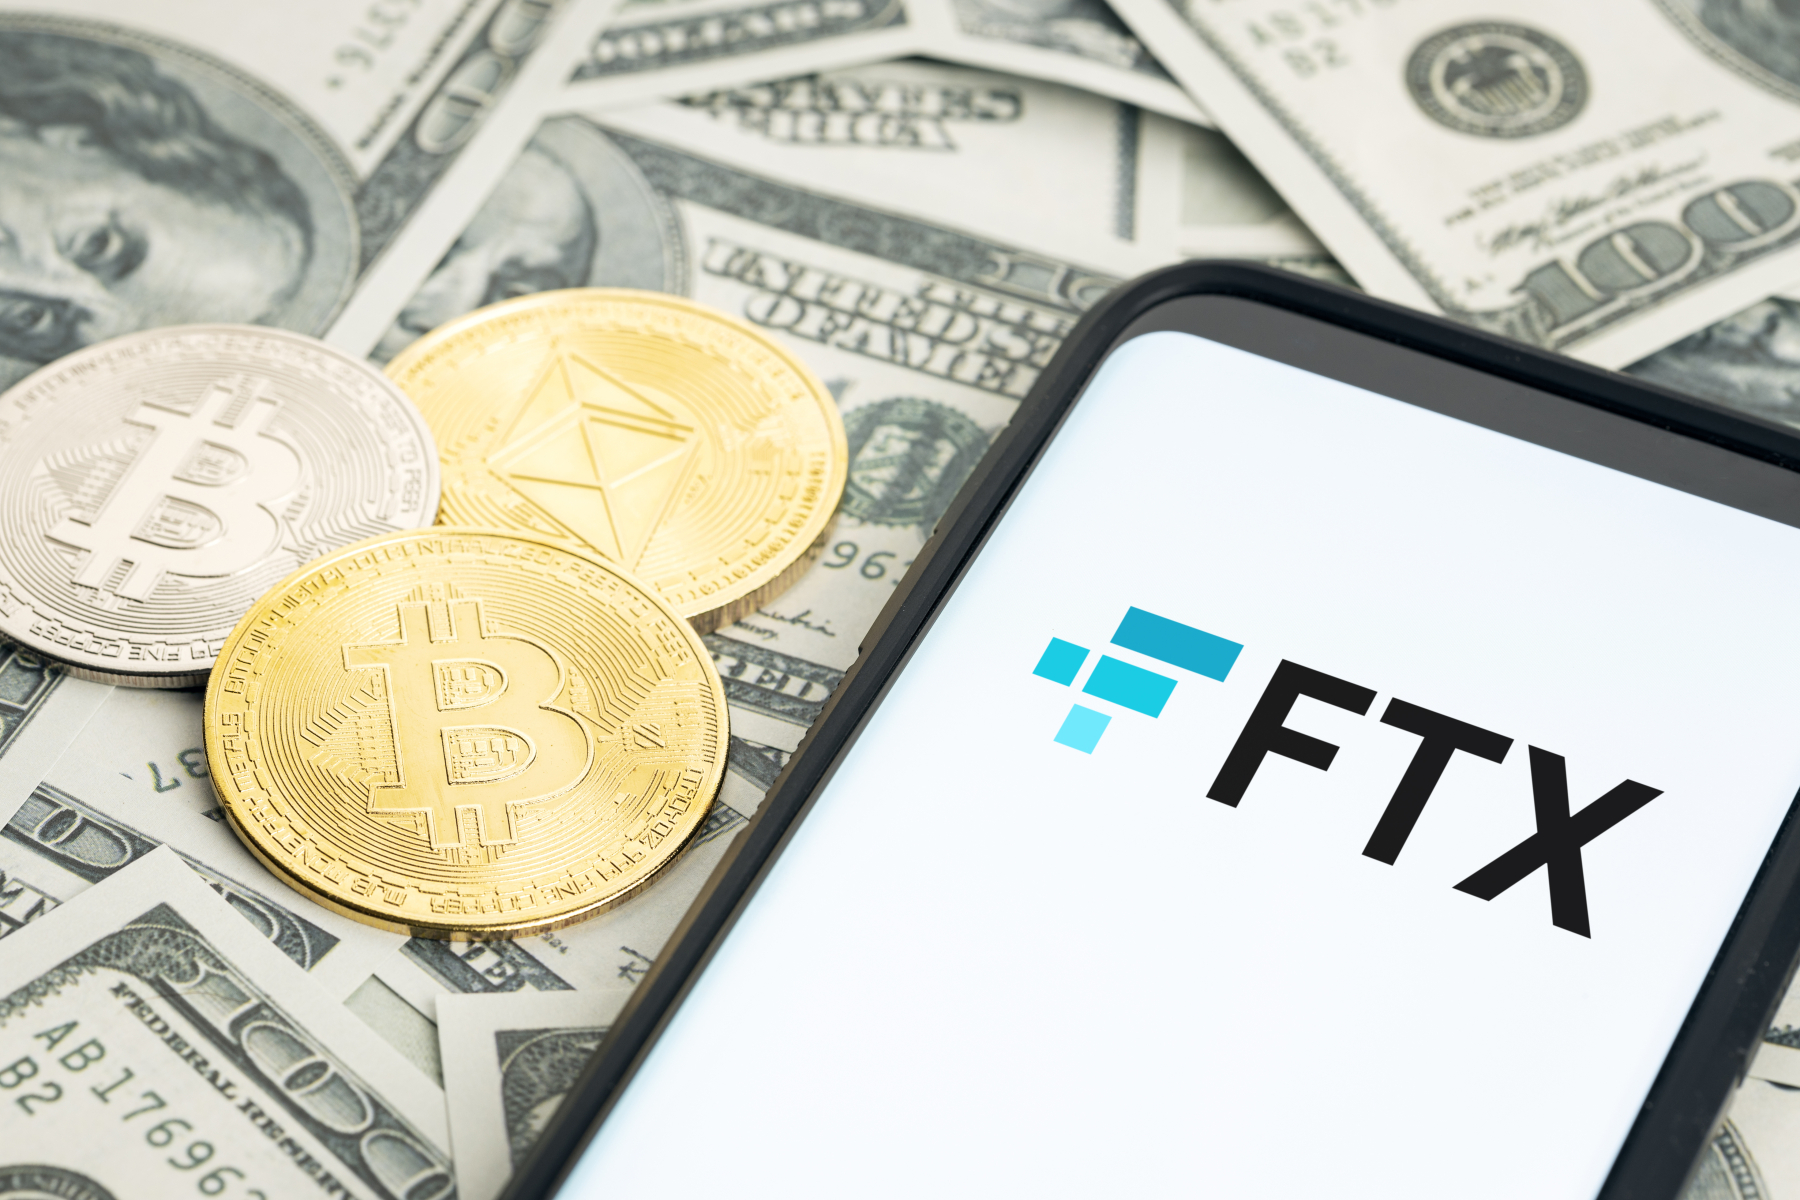 FTX-related stablecoins on the move: $145 million transferred to crypto exchanges
